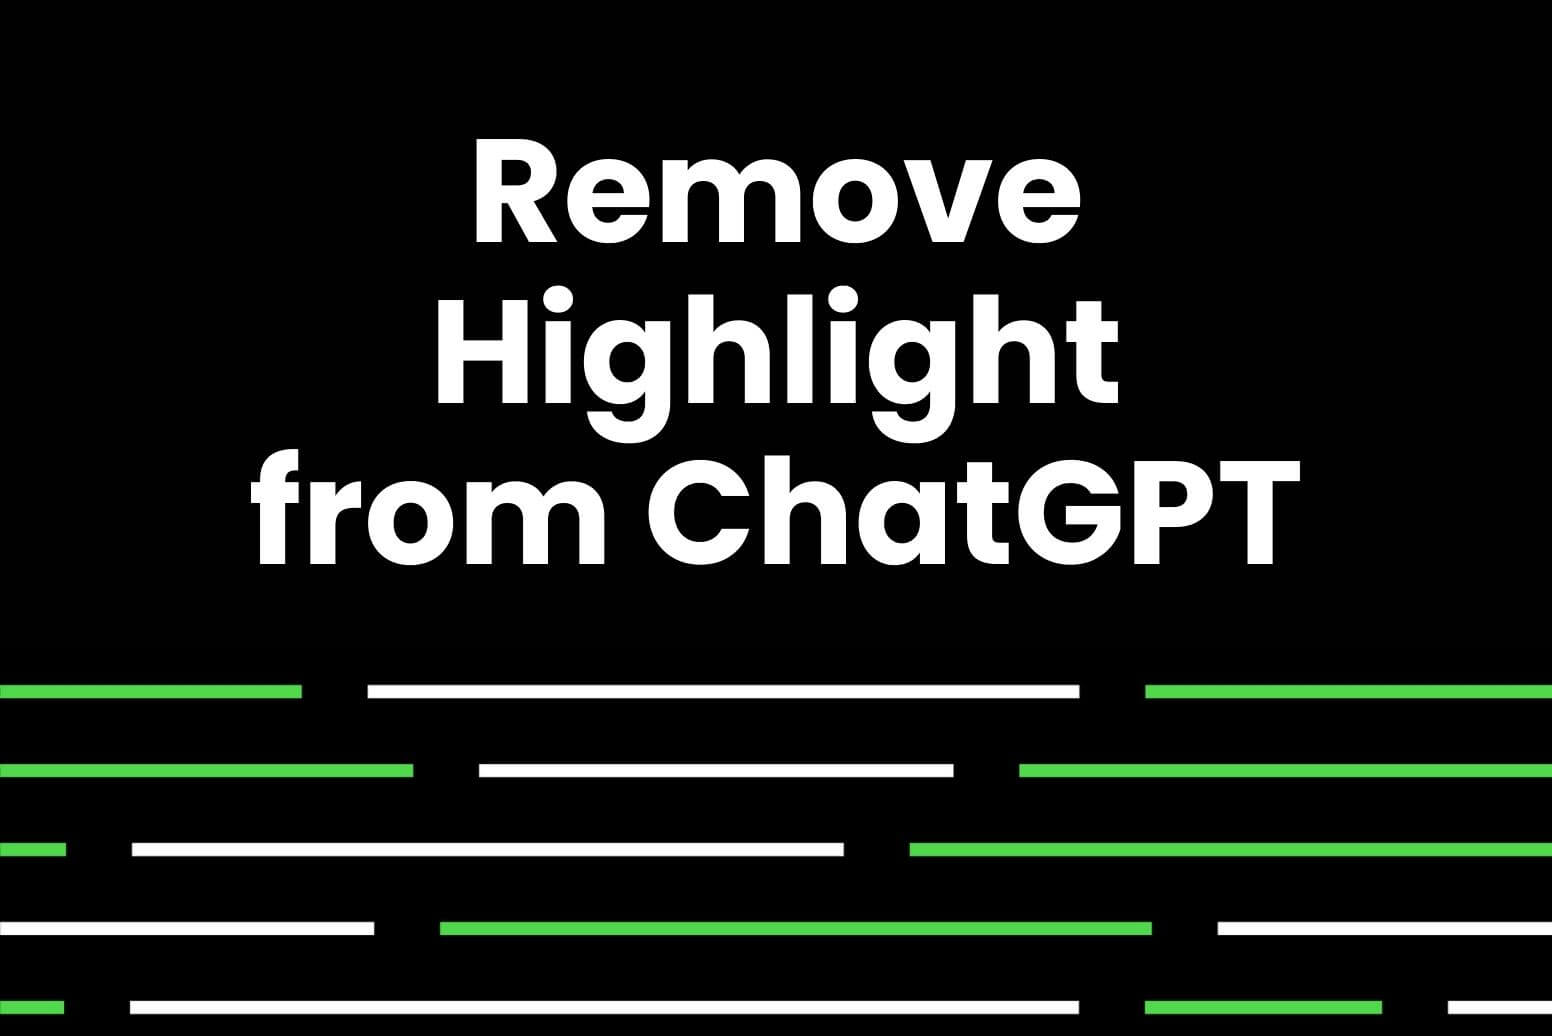 How to remove highlight from ChatGPT